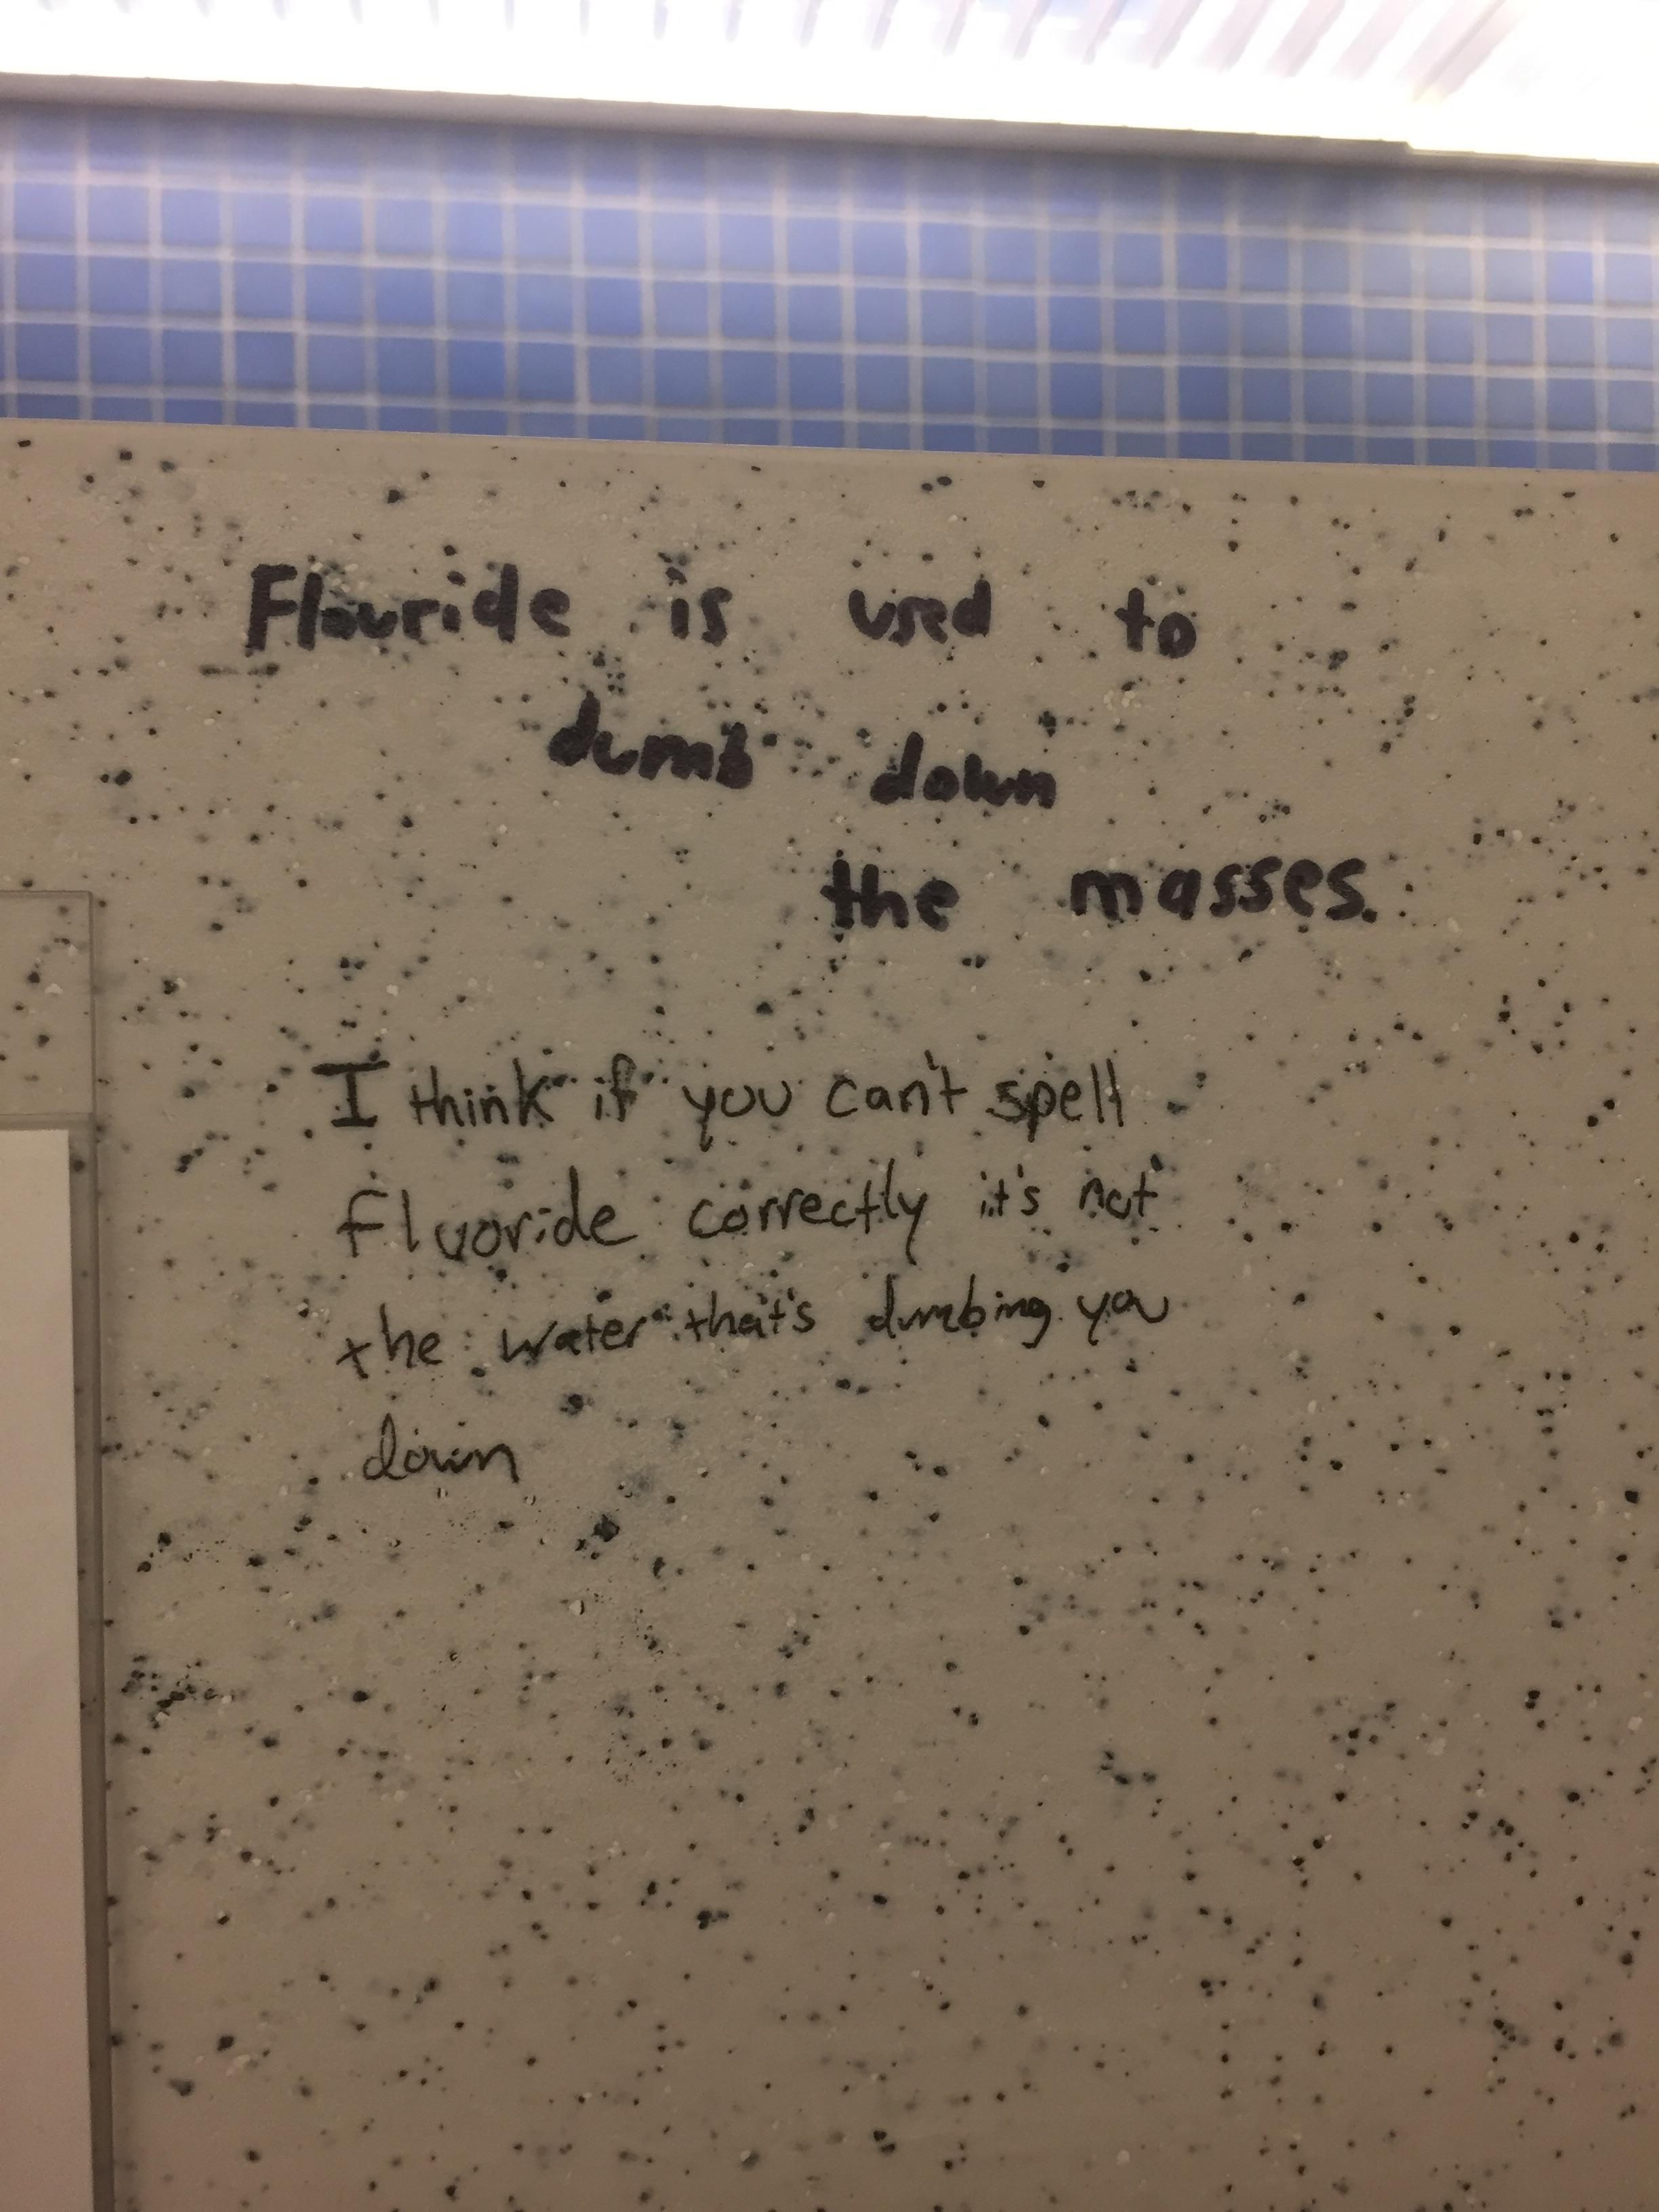 Found this insightful exchange of words in my Community college bathroom